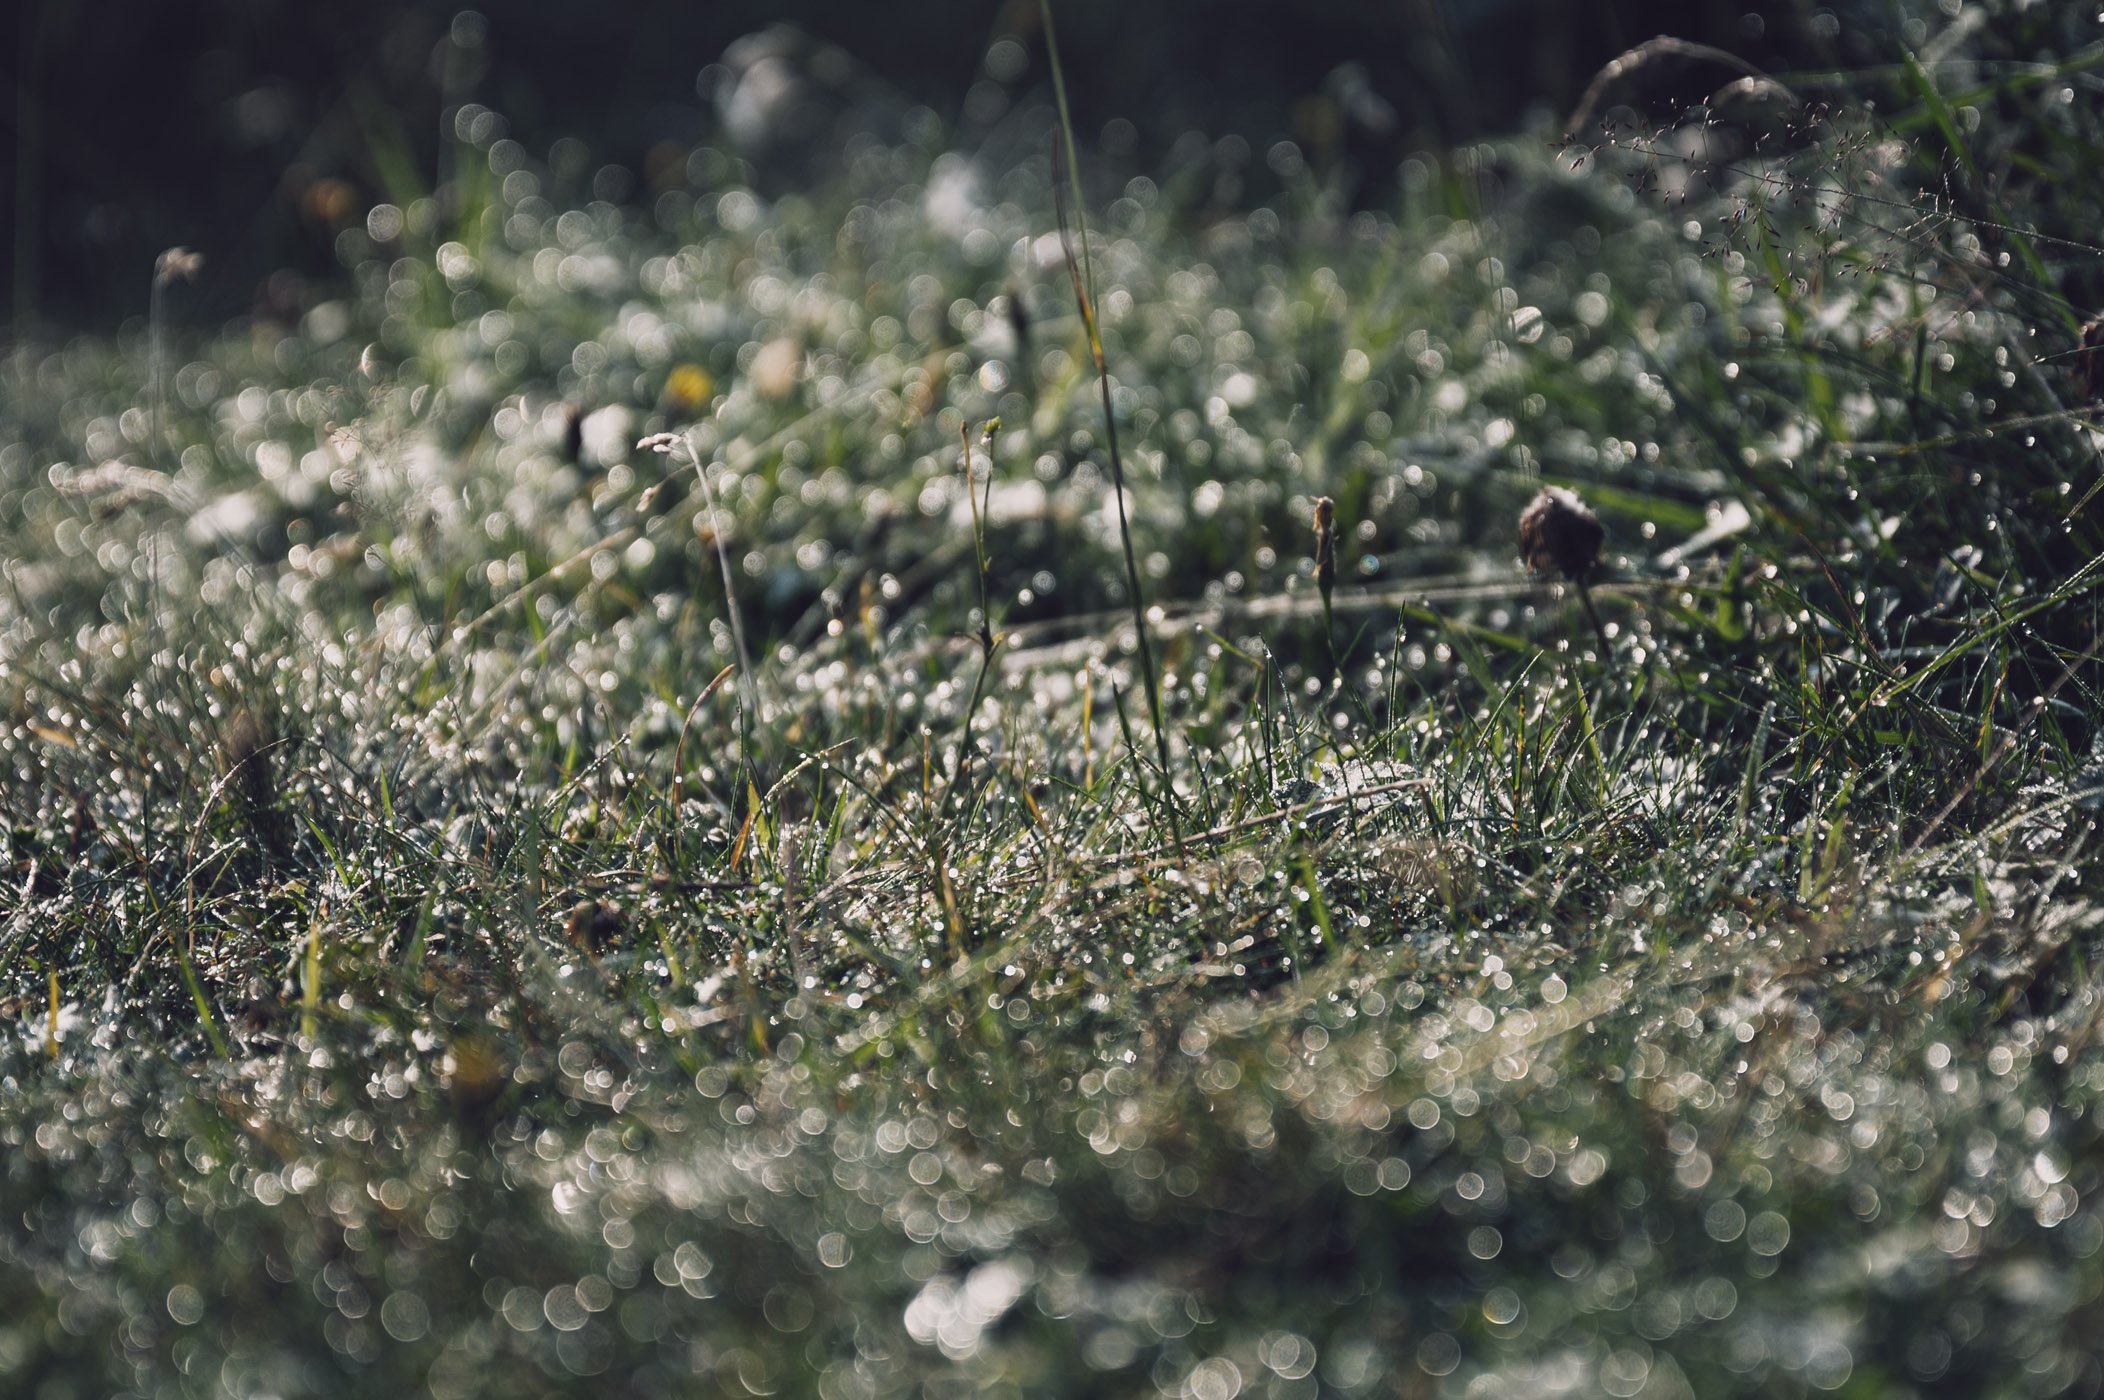 Treading in dew in East Tyrol - part of mindful mountain experiences